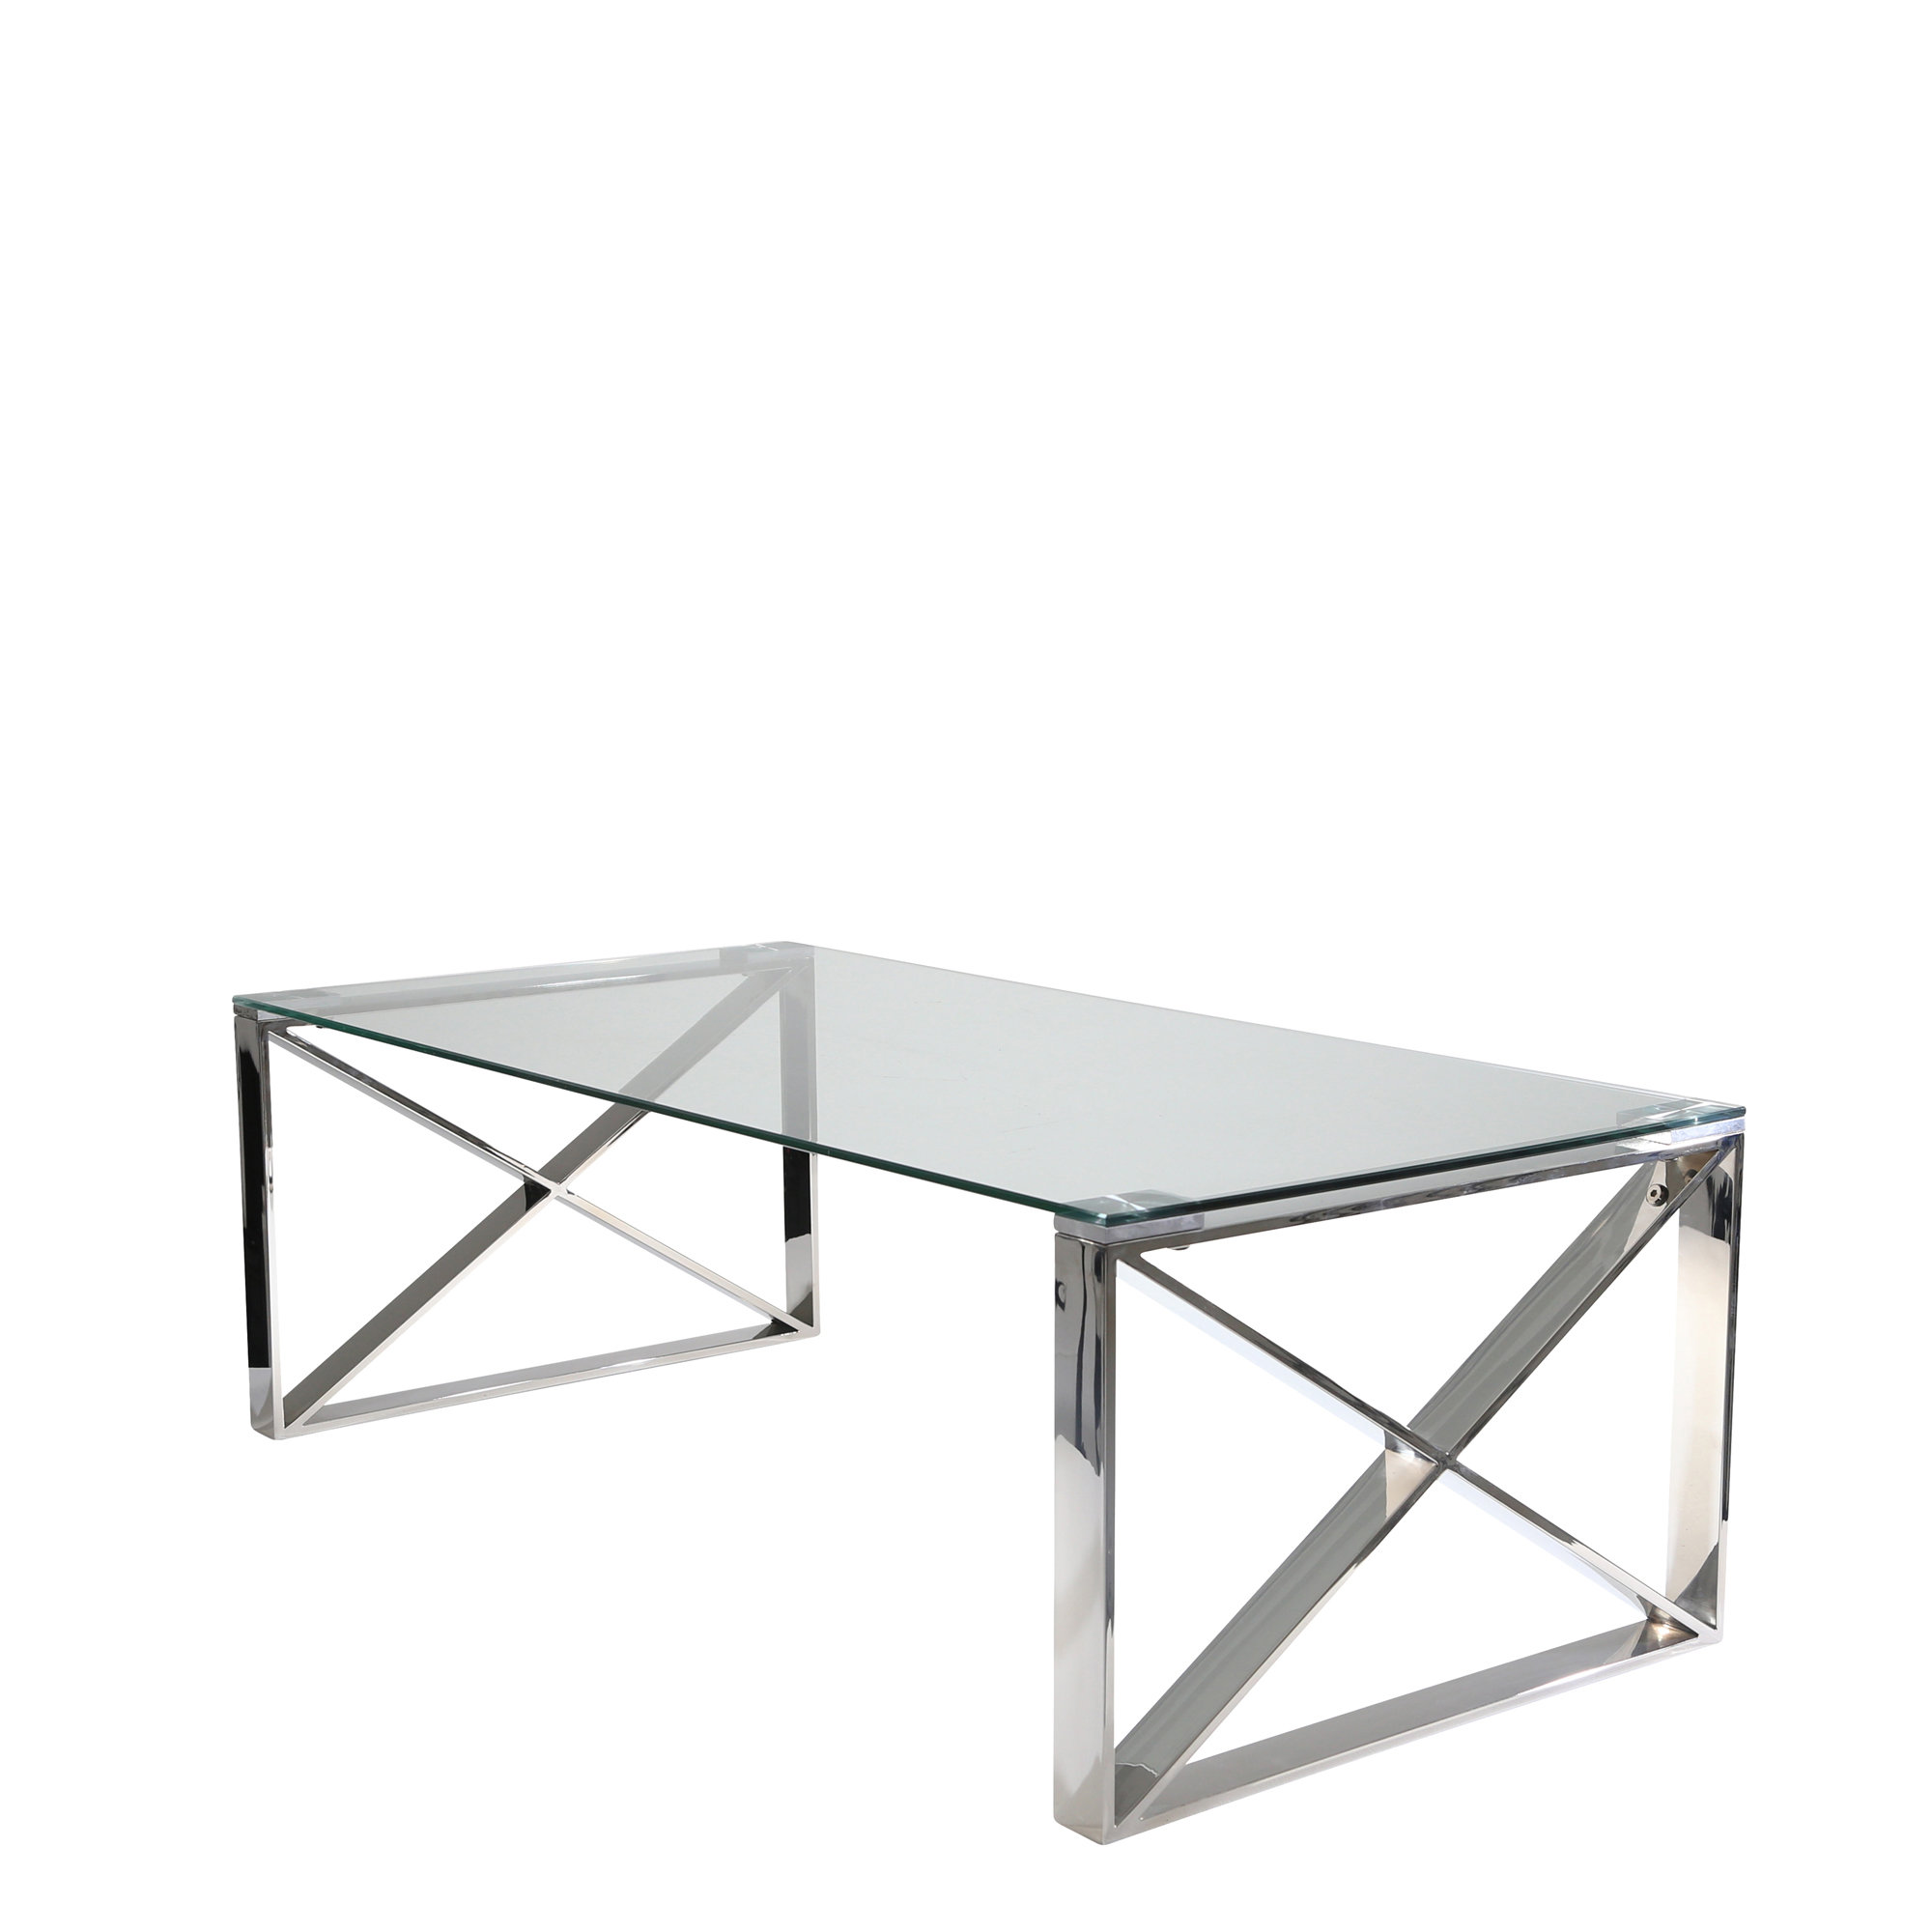 Mercer41 Stainless Steel And Glass Coffee Table Reviews Wayfair